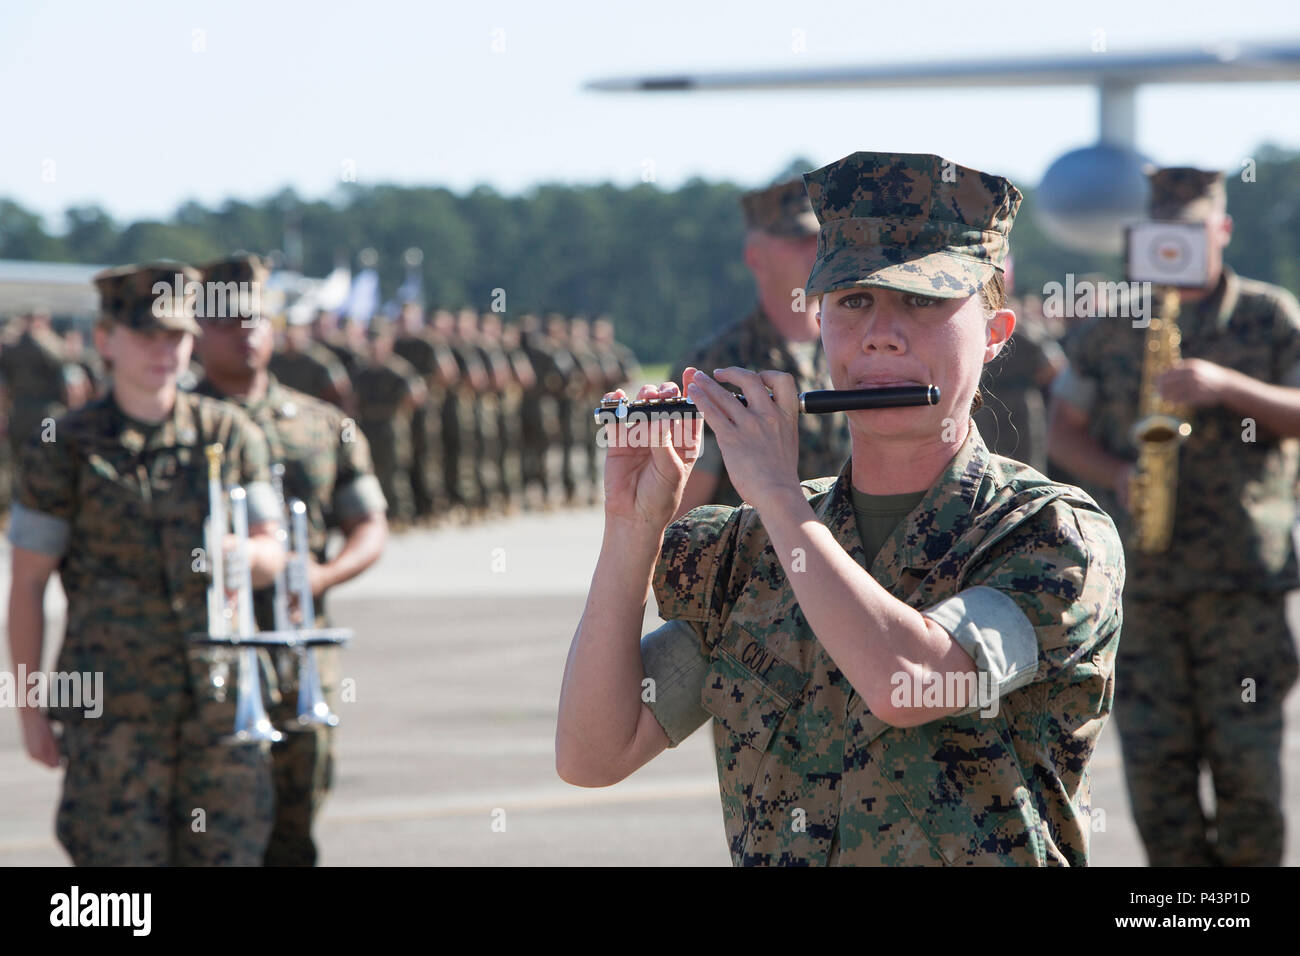 Members Of The 2nd Marine Aircraft Wing Maw Band Participate In A